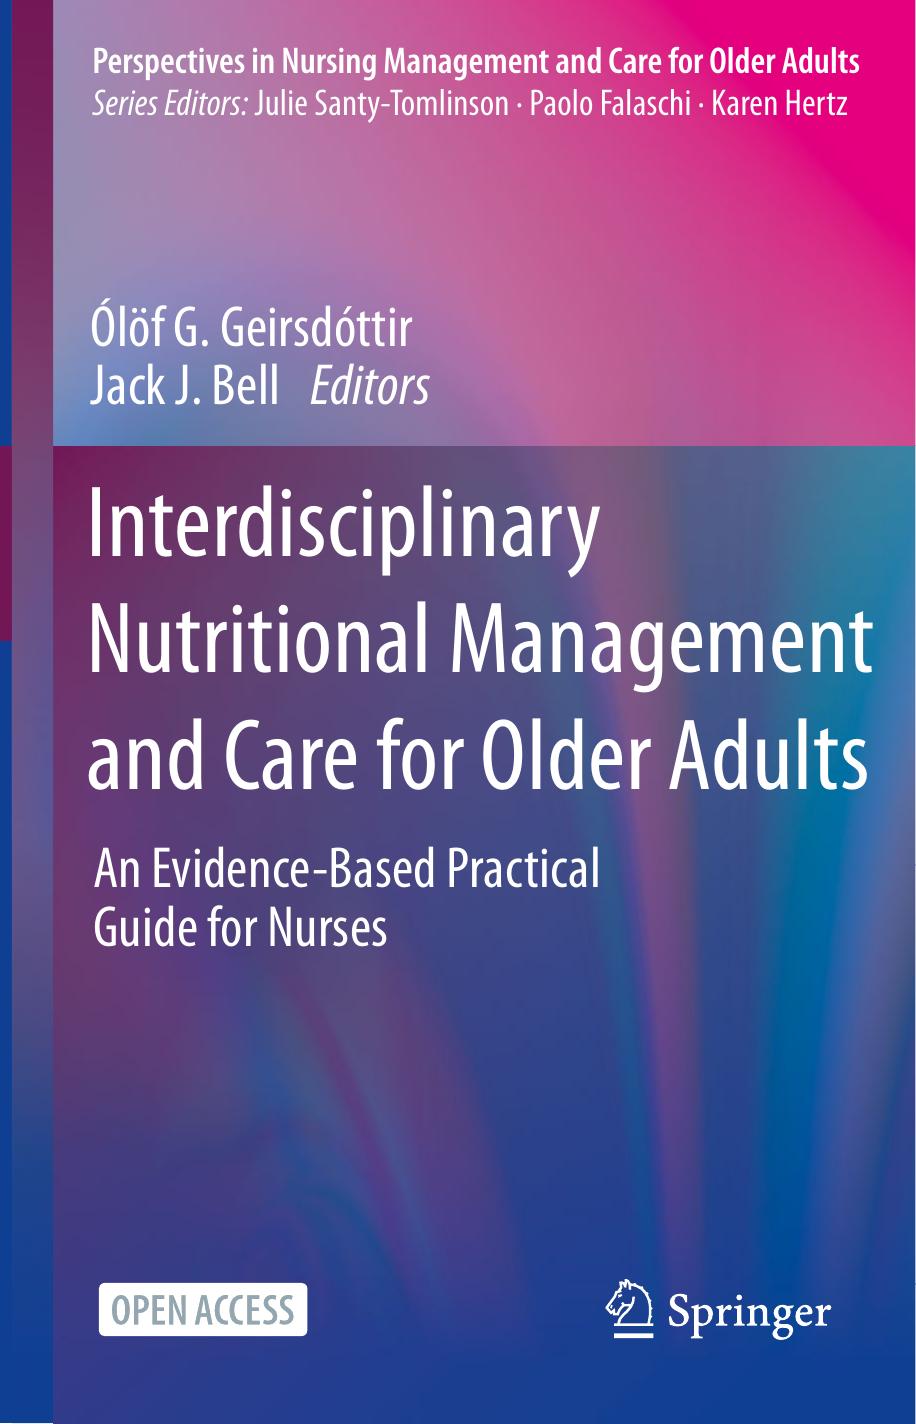 Interdisciplinary Nutritional Management and Care for Older Adults  An Evidence-Based Practical Guide For Nurses 2021